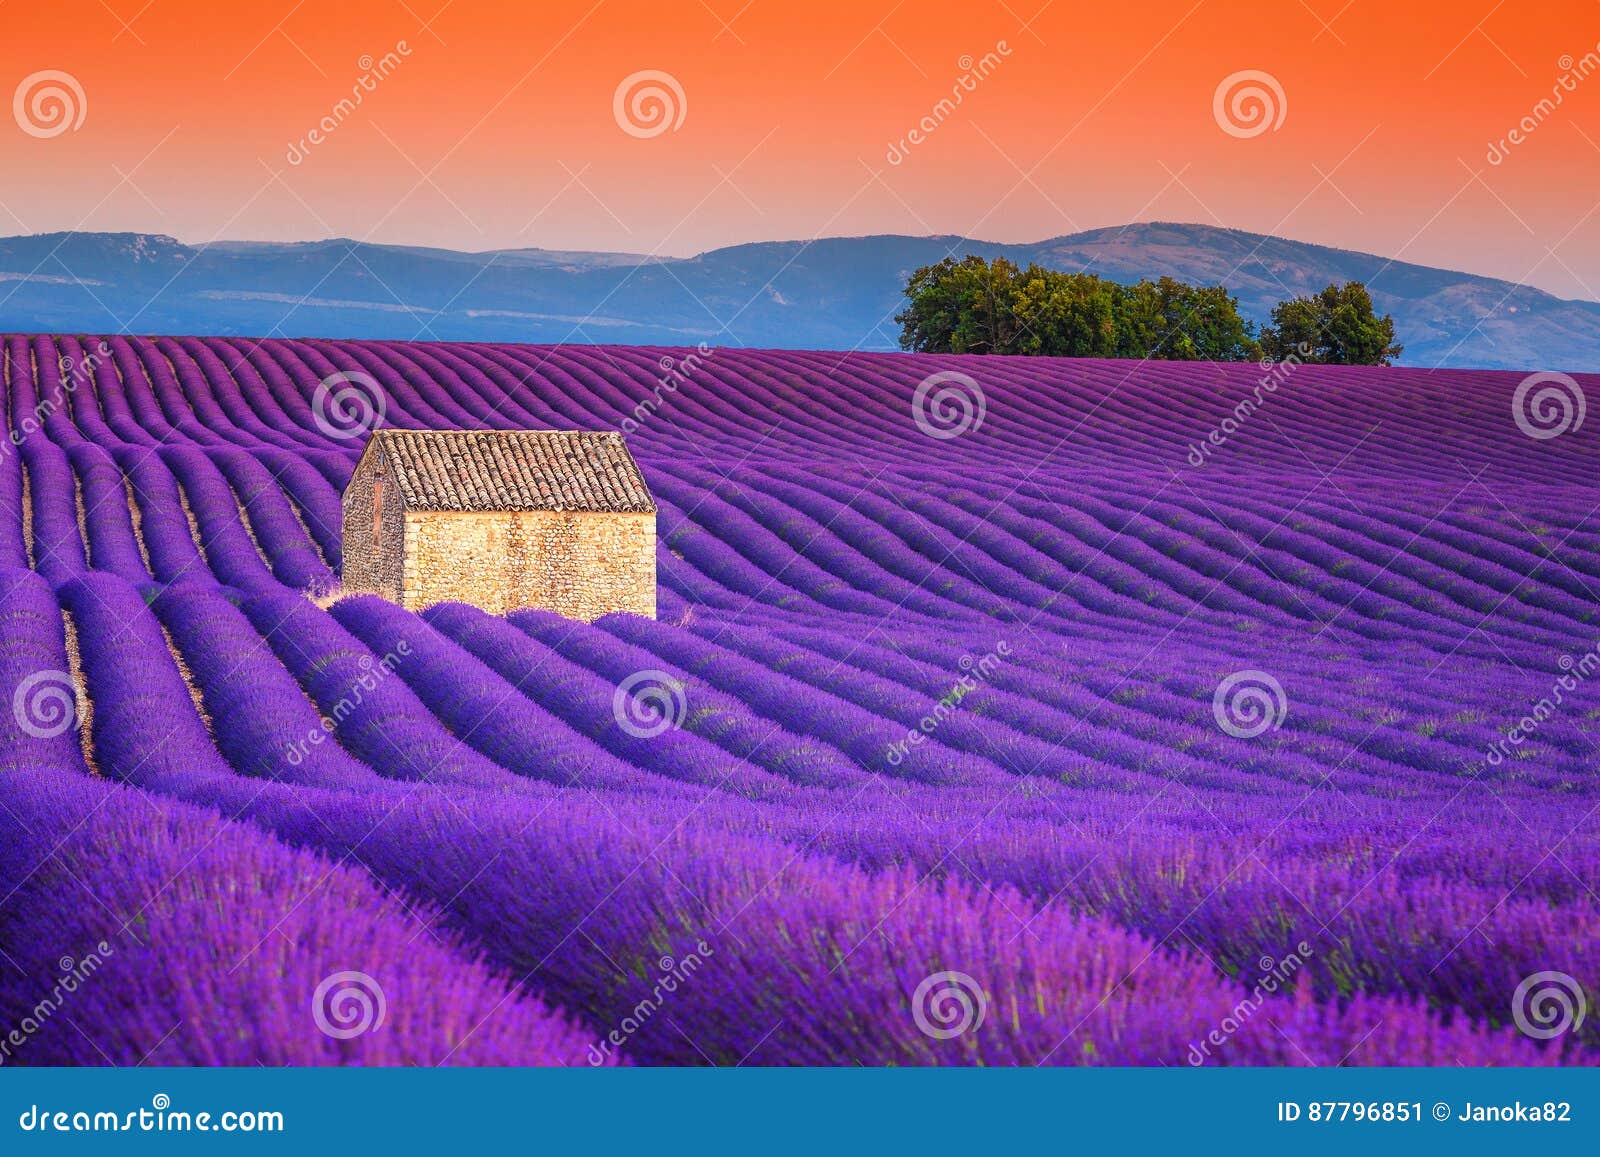 spectacular lavender fields in provence, valensole, france, europe